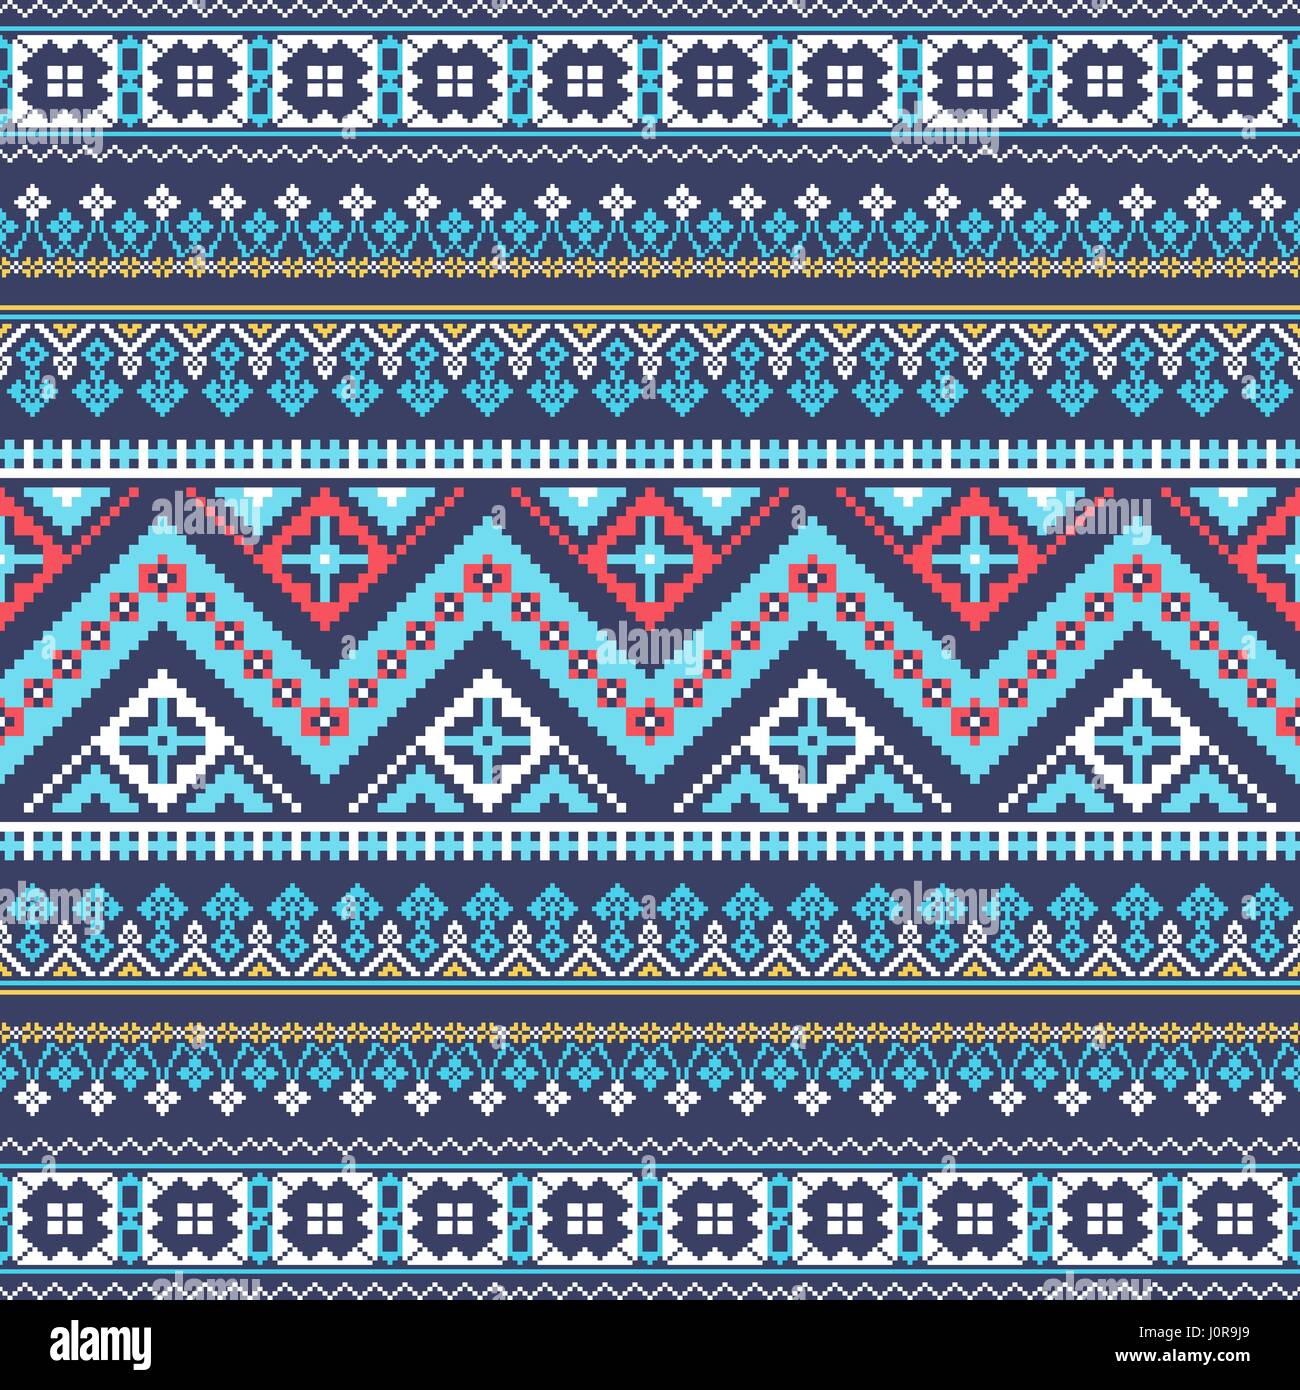 Aztec pixel seamless pattern. Ideal for printing onto fabric, paper, web design. Stock Vector